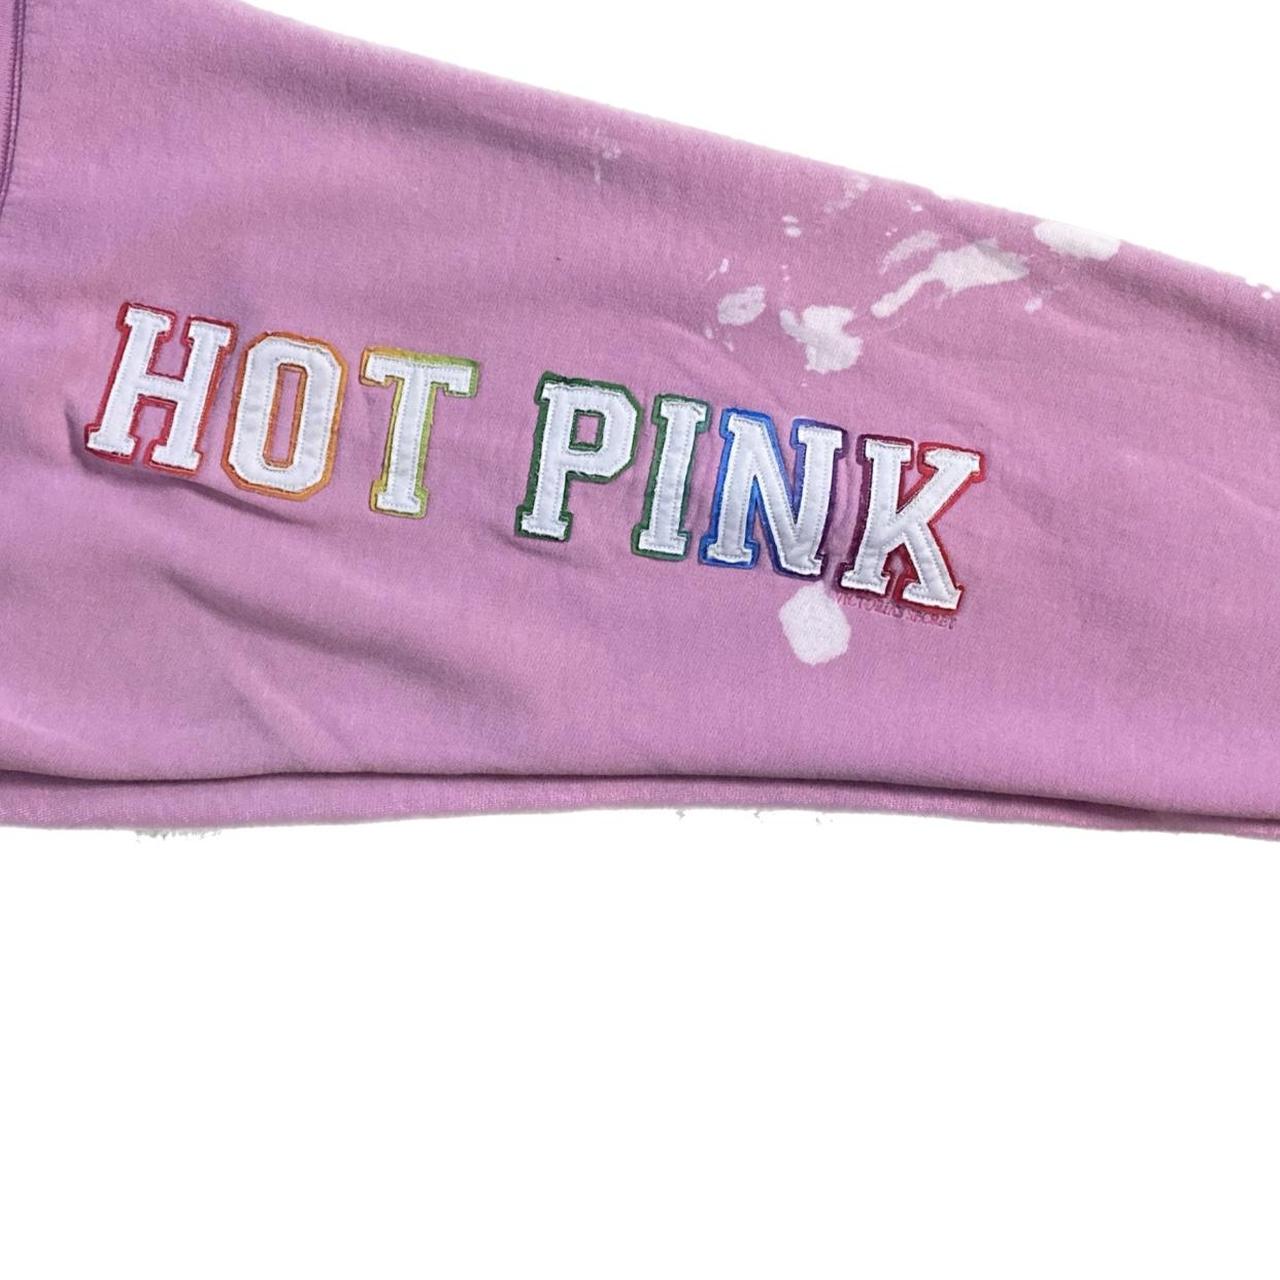 Victoria's Secret: FREE $9.95 Headband When You Try On PINK Sports